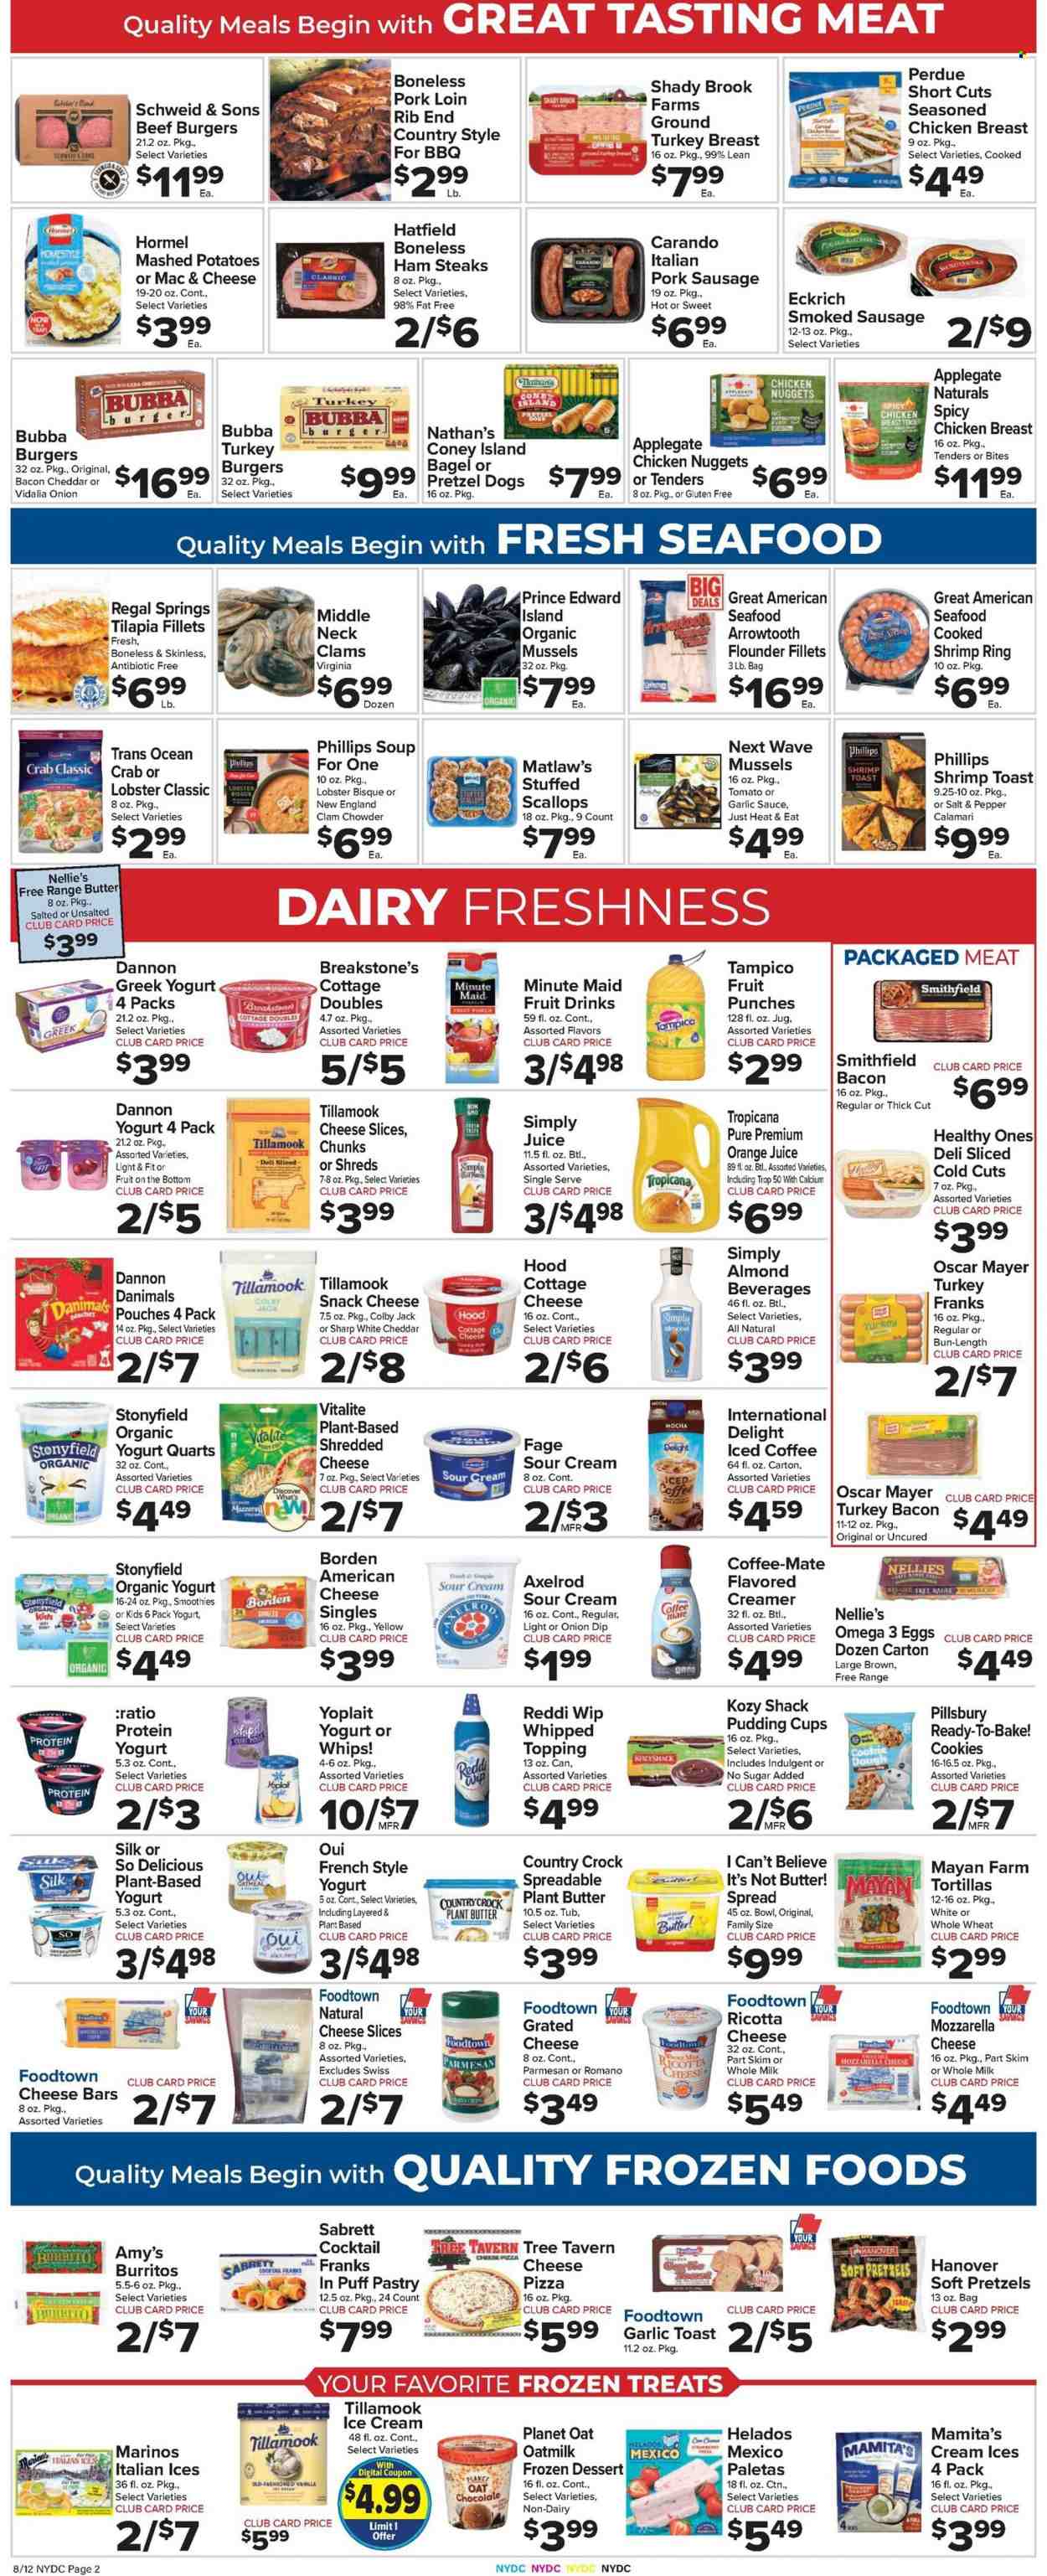 thumbnail - Foodtown Flyer - 08/12/2022 - 08/18/2022 - Sales products - bagels, tortillas, pretzels, calamari, flounder, lobster, mussels, scallops, tilapia, seafood, crab, shrimps, mashed potatoes, pizza, soup, nuggets, hamburger, Pillsbury, chicken nuggets, burrito, beef burger, Perdue®, Hormel, bacon, turkey bacon, ham, Oscar Mayer, sausage, smoked sausage, pork sausage, ham steaks, american cheese, Colby cheese, cottage cheese, ricotta, shredded cheese, sliced cheese, cheddar, parmesan, grated cheese, greek yoghurt, pudding, yoghurt, organic yoghurt, Yoplait, Dannon, Danimals, Coffee-Mate, milk, Silk, oat milk, butter, I Can't Believe It's Not Butter, sour cream, creamer, dip, ice cream, cookie dough, cookies, snack, topping, clam chowder, garlic sauce, orange juice, juice, fruit punch, smoothie, iced coffee, ground turkey, turkey breast, chicken breasts, steak, turkey burger, pork loin, pork meat, WAVE, cup, bowl, Sharp, towel, calcium, Omega-3. Page 2.